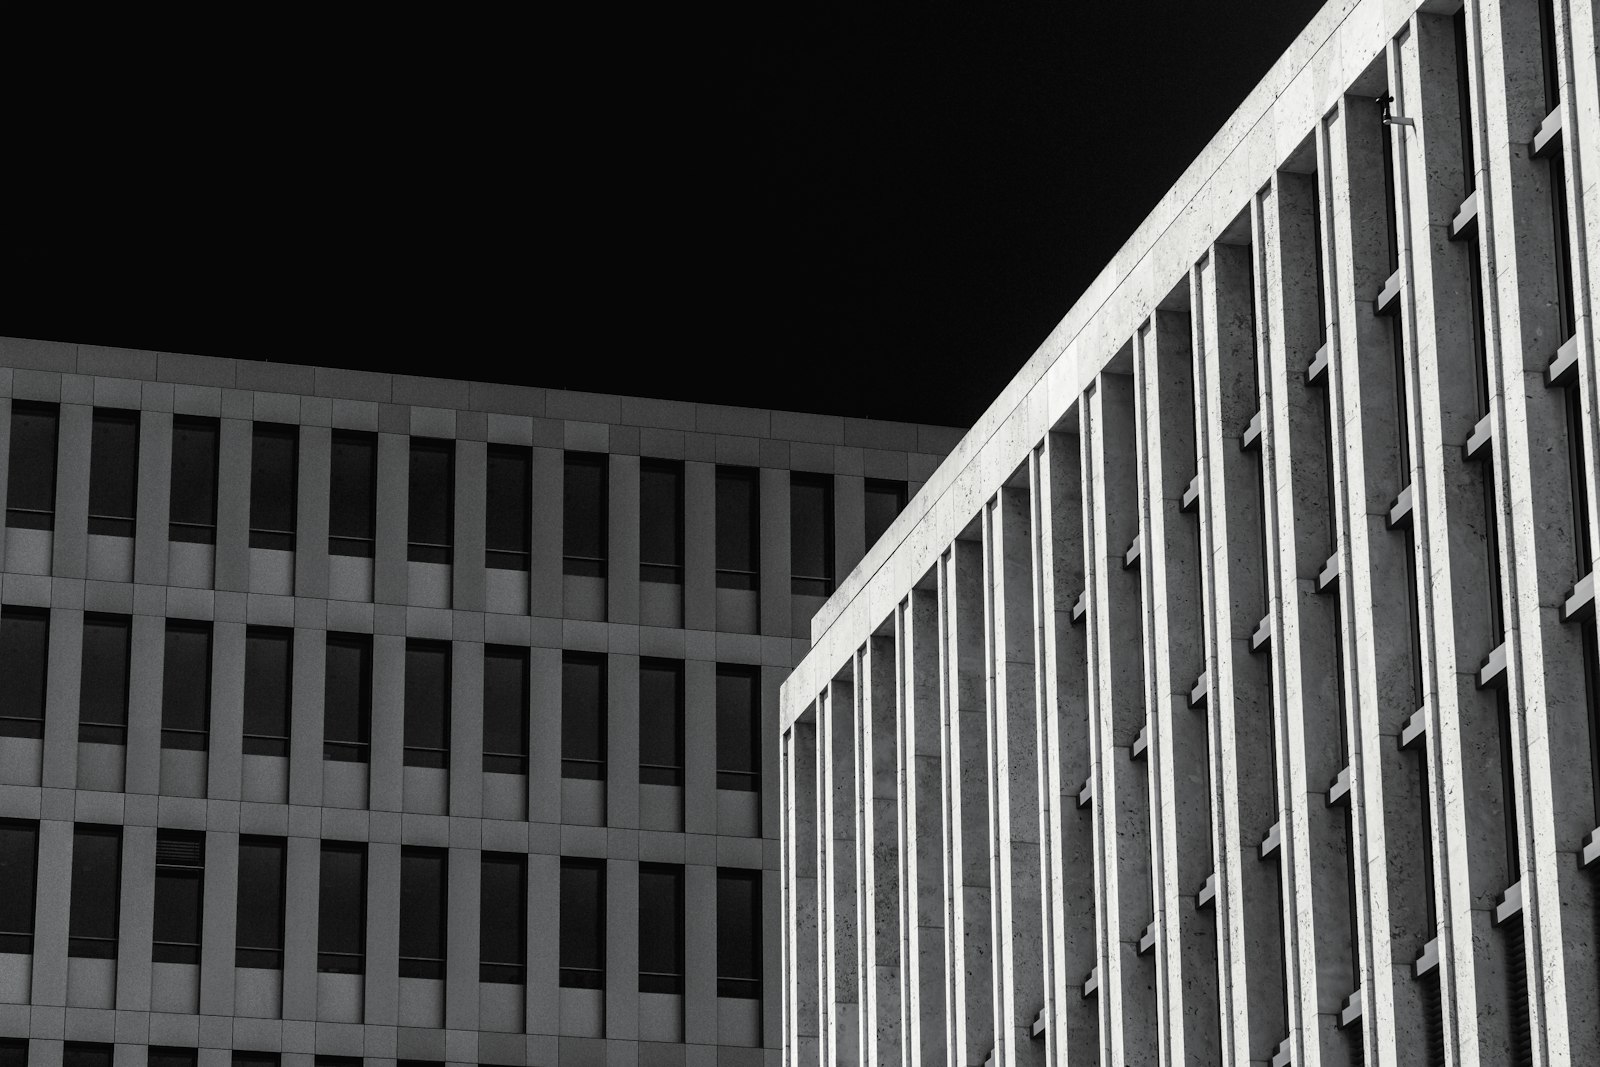 Sigma 24-105mm f/4 DG OS HSM | A sample photo. Two gray concrete buildings photography